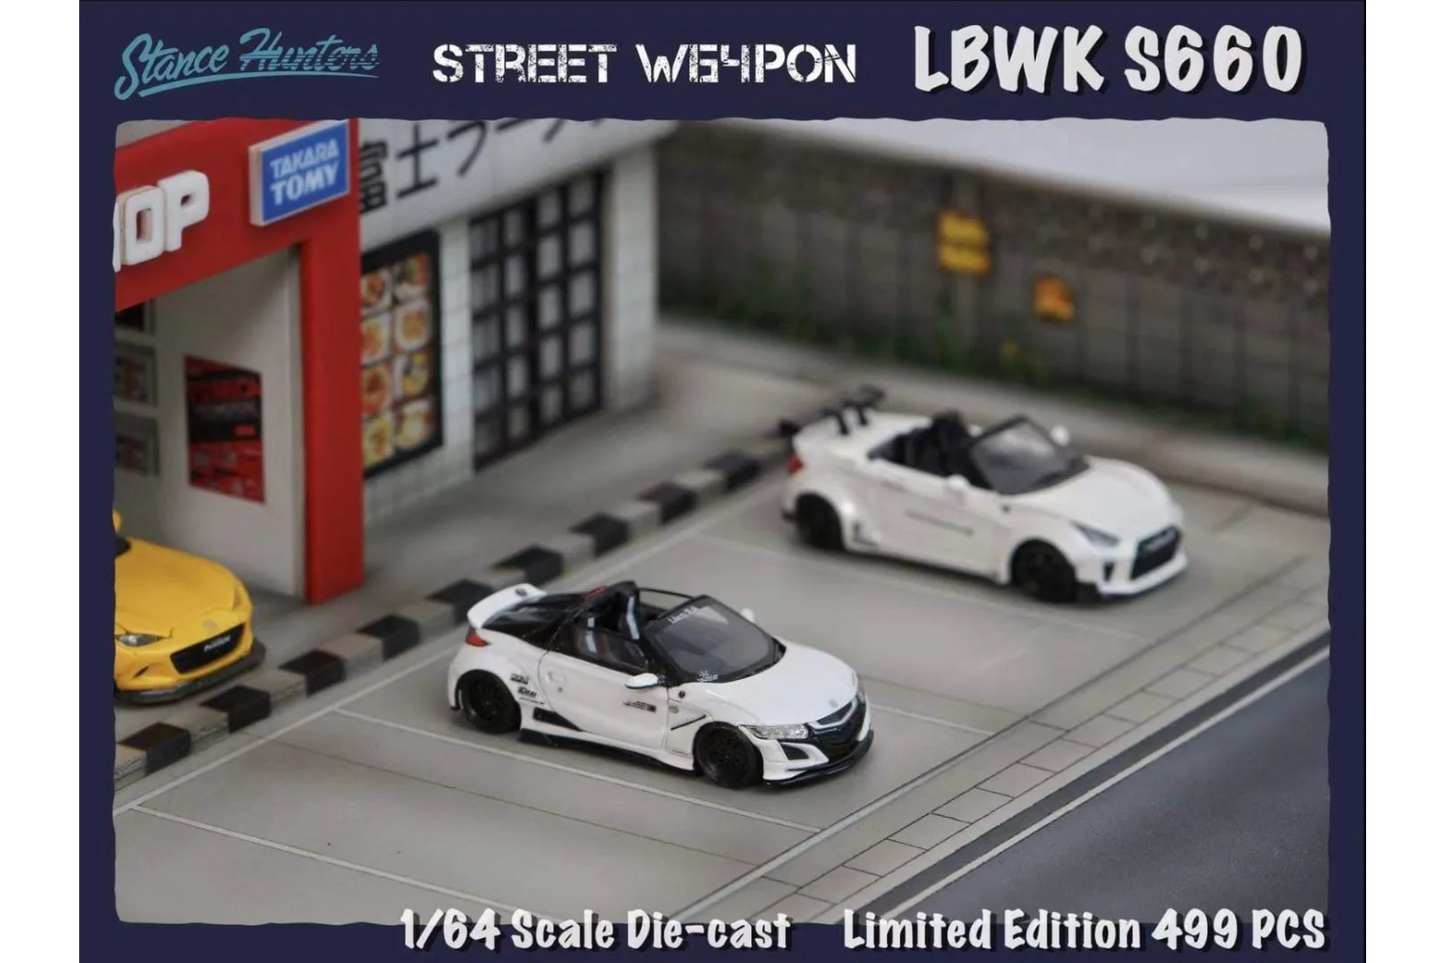 Stance Hunters x Street Weapon 1/64 Honda S660 LBWK in White